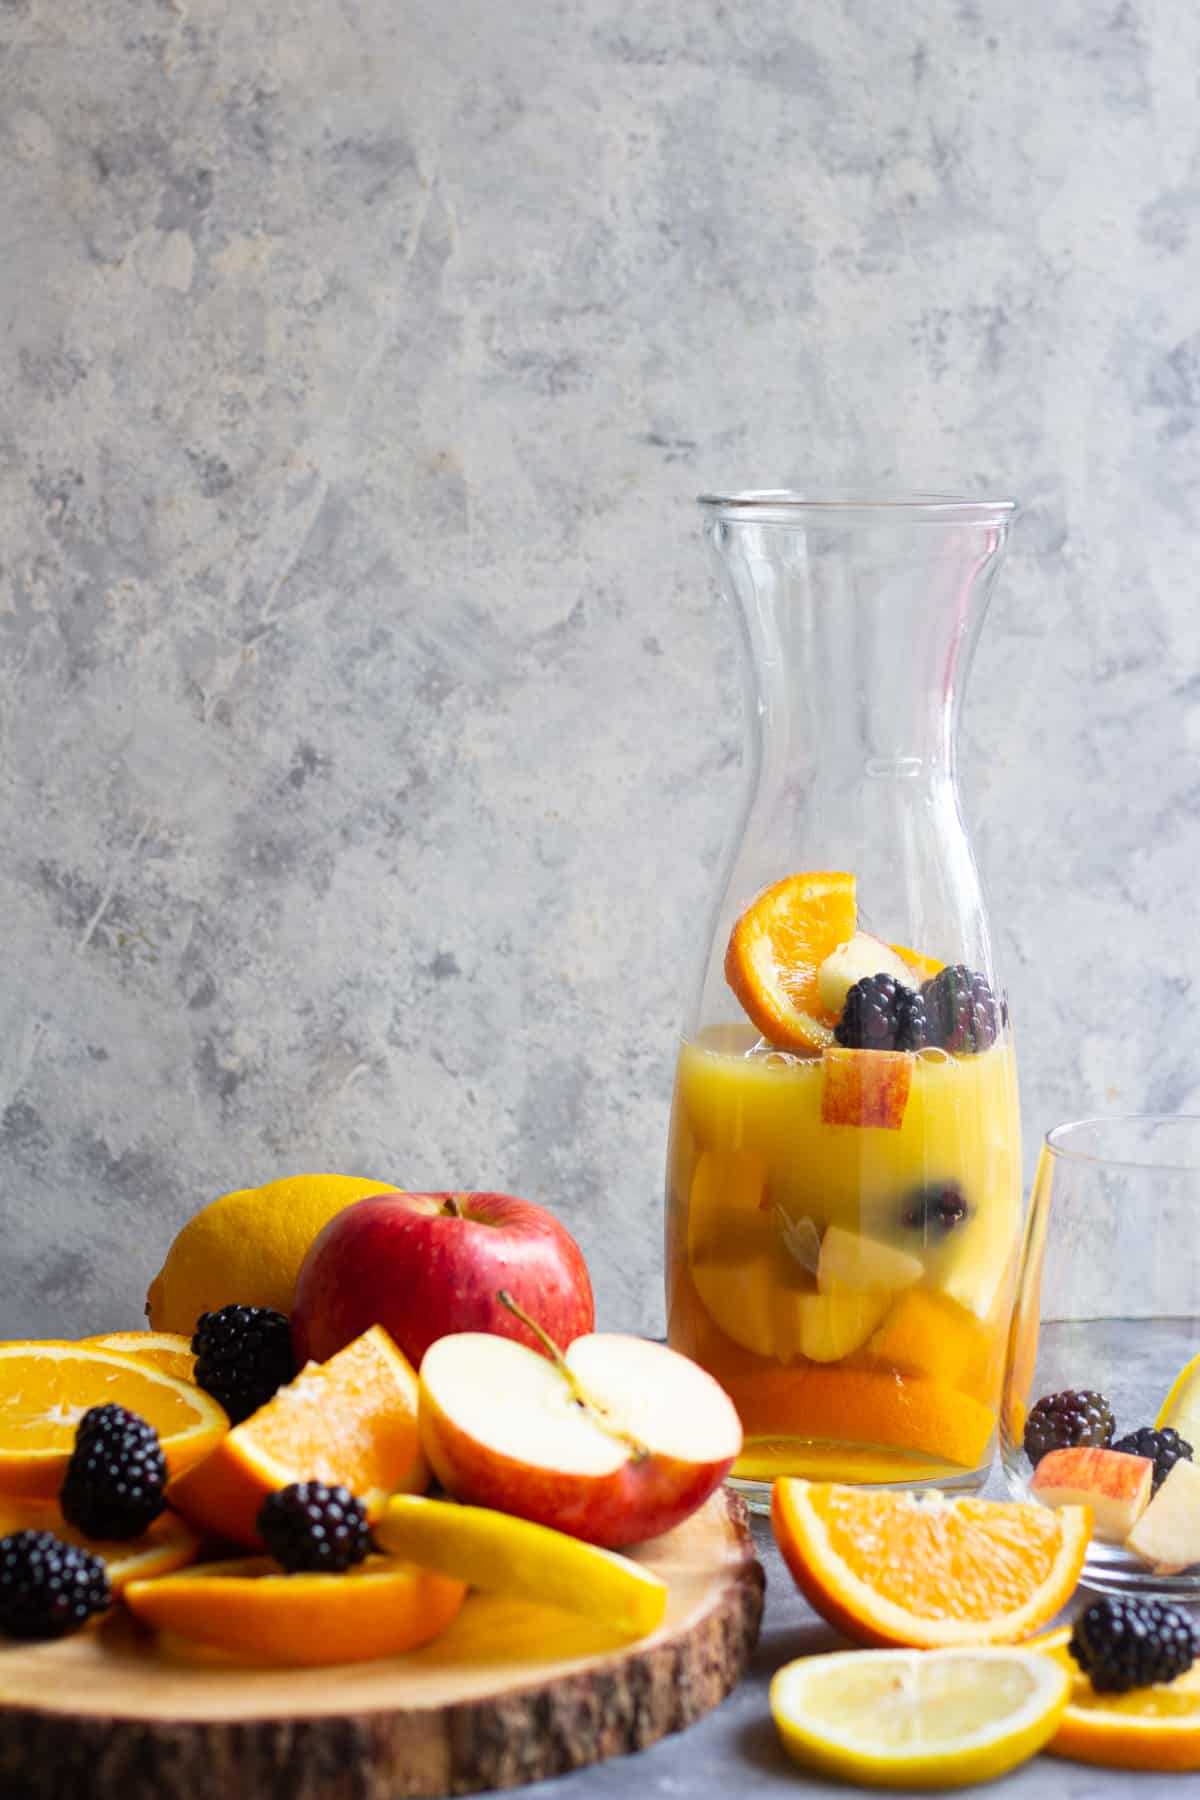 Cut up the fruit and add it to a pitcher. Add orange juice to the pitcher. 